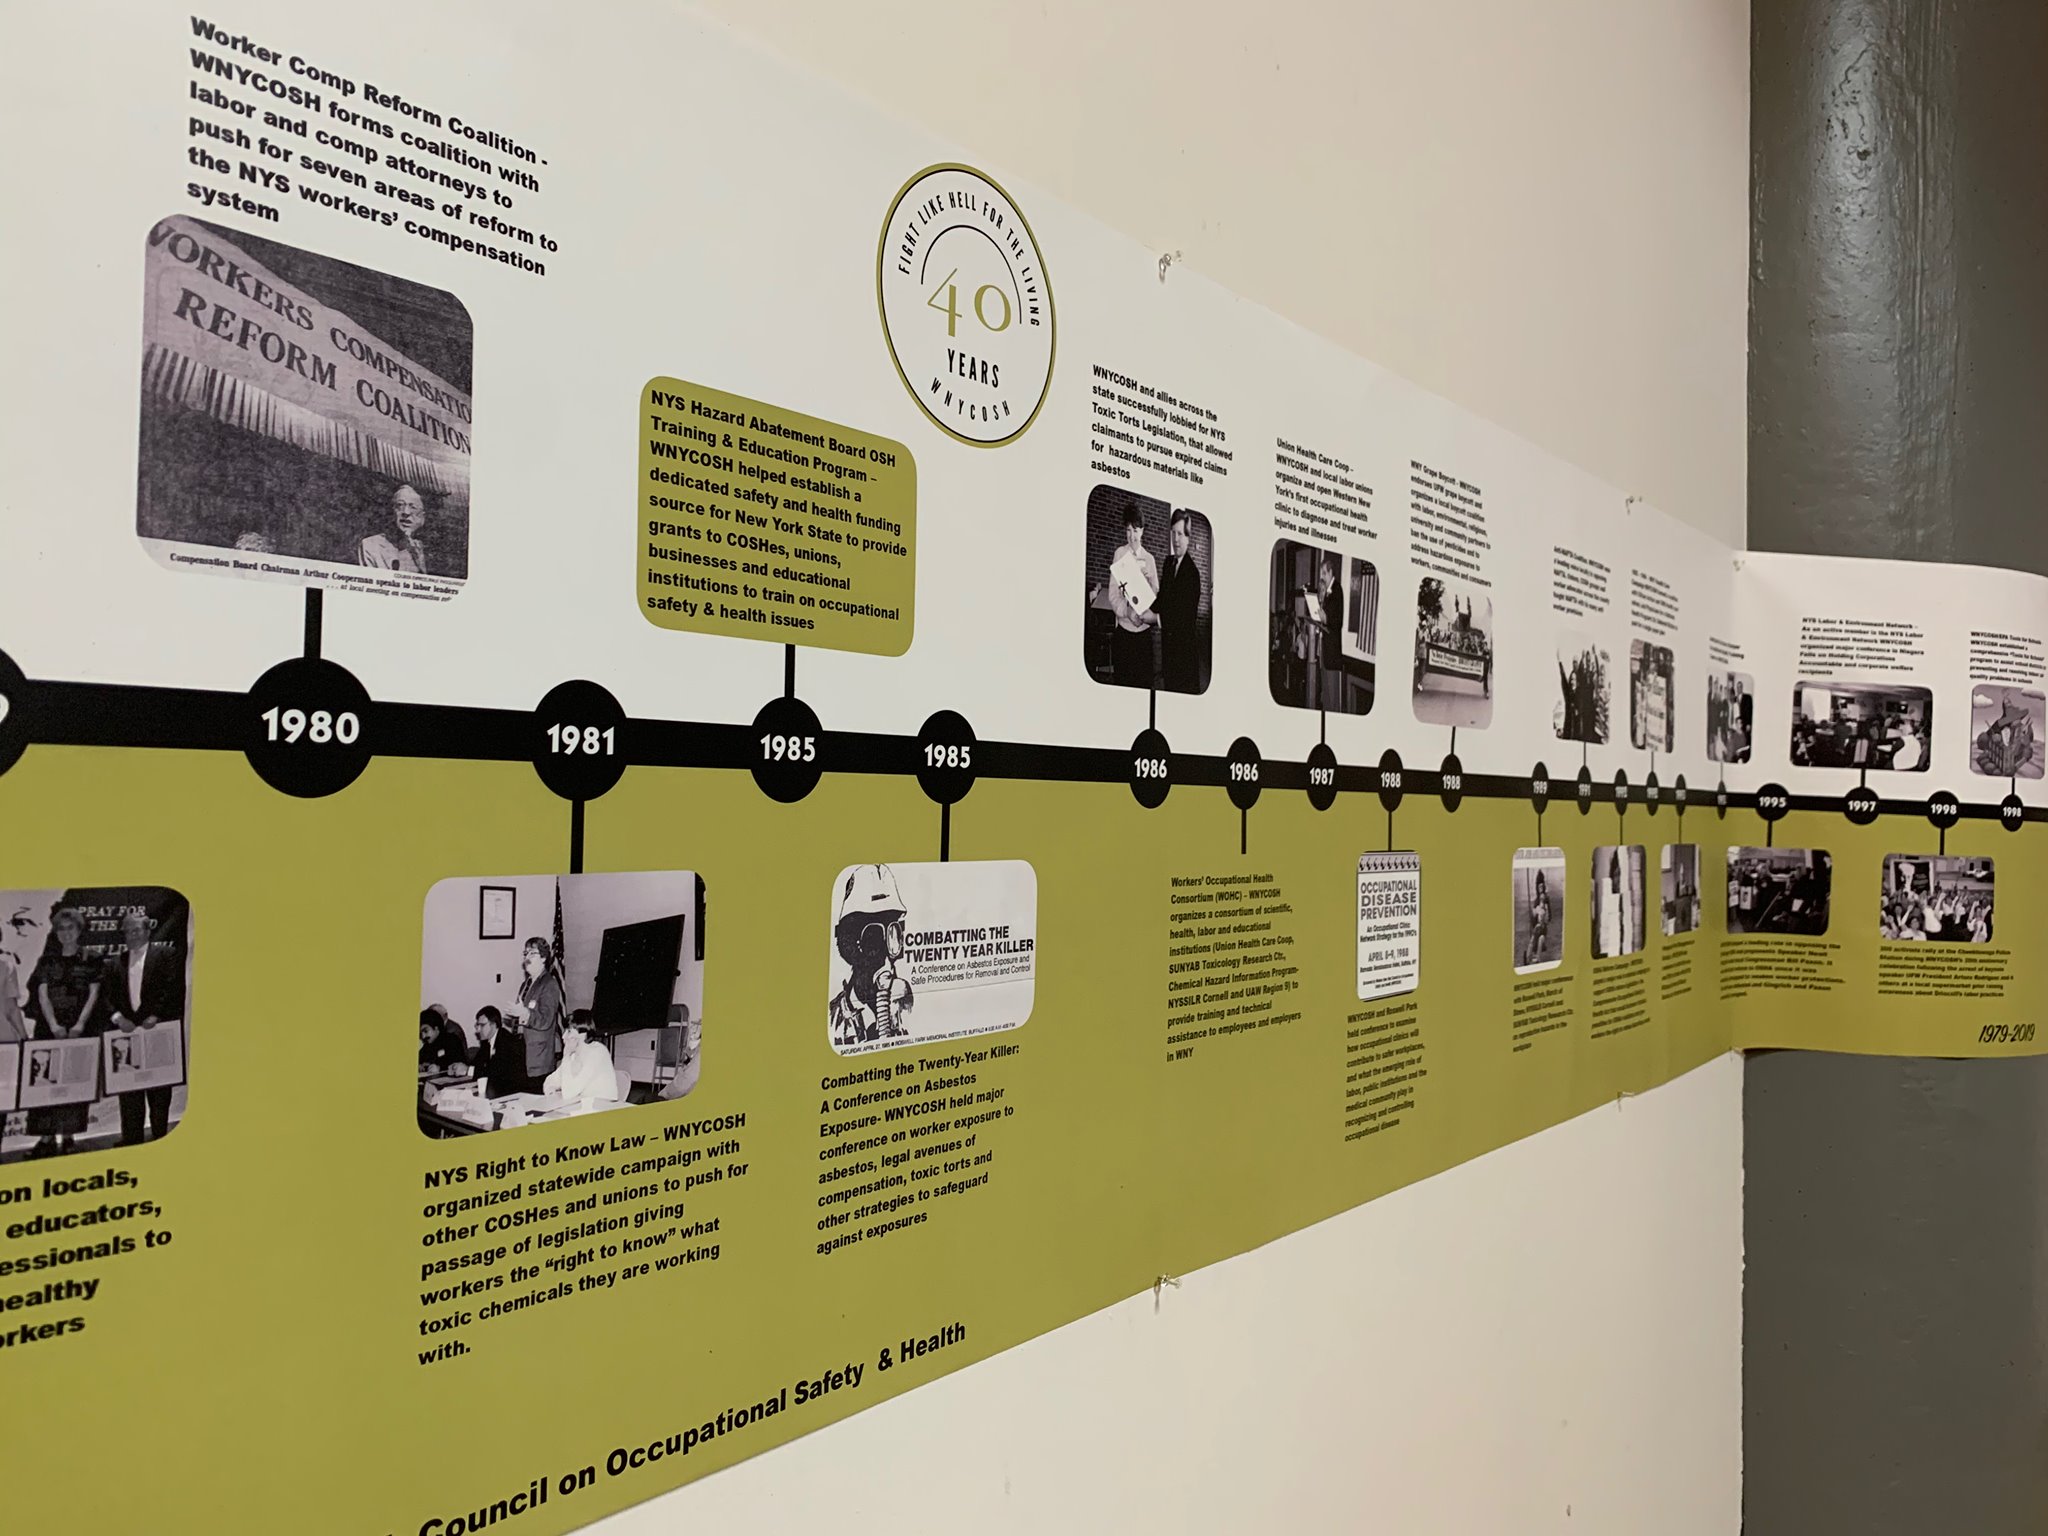 Picture of WNYCOSH History timeline